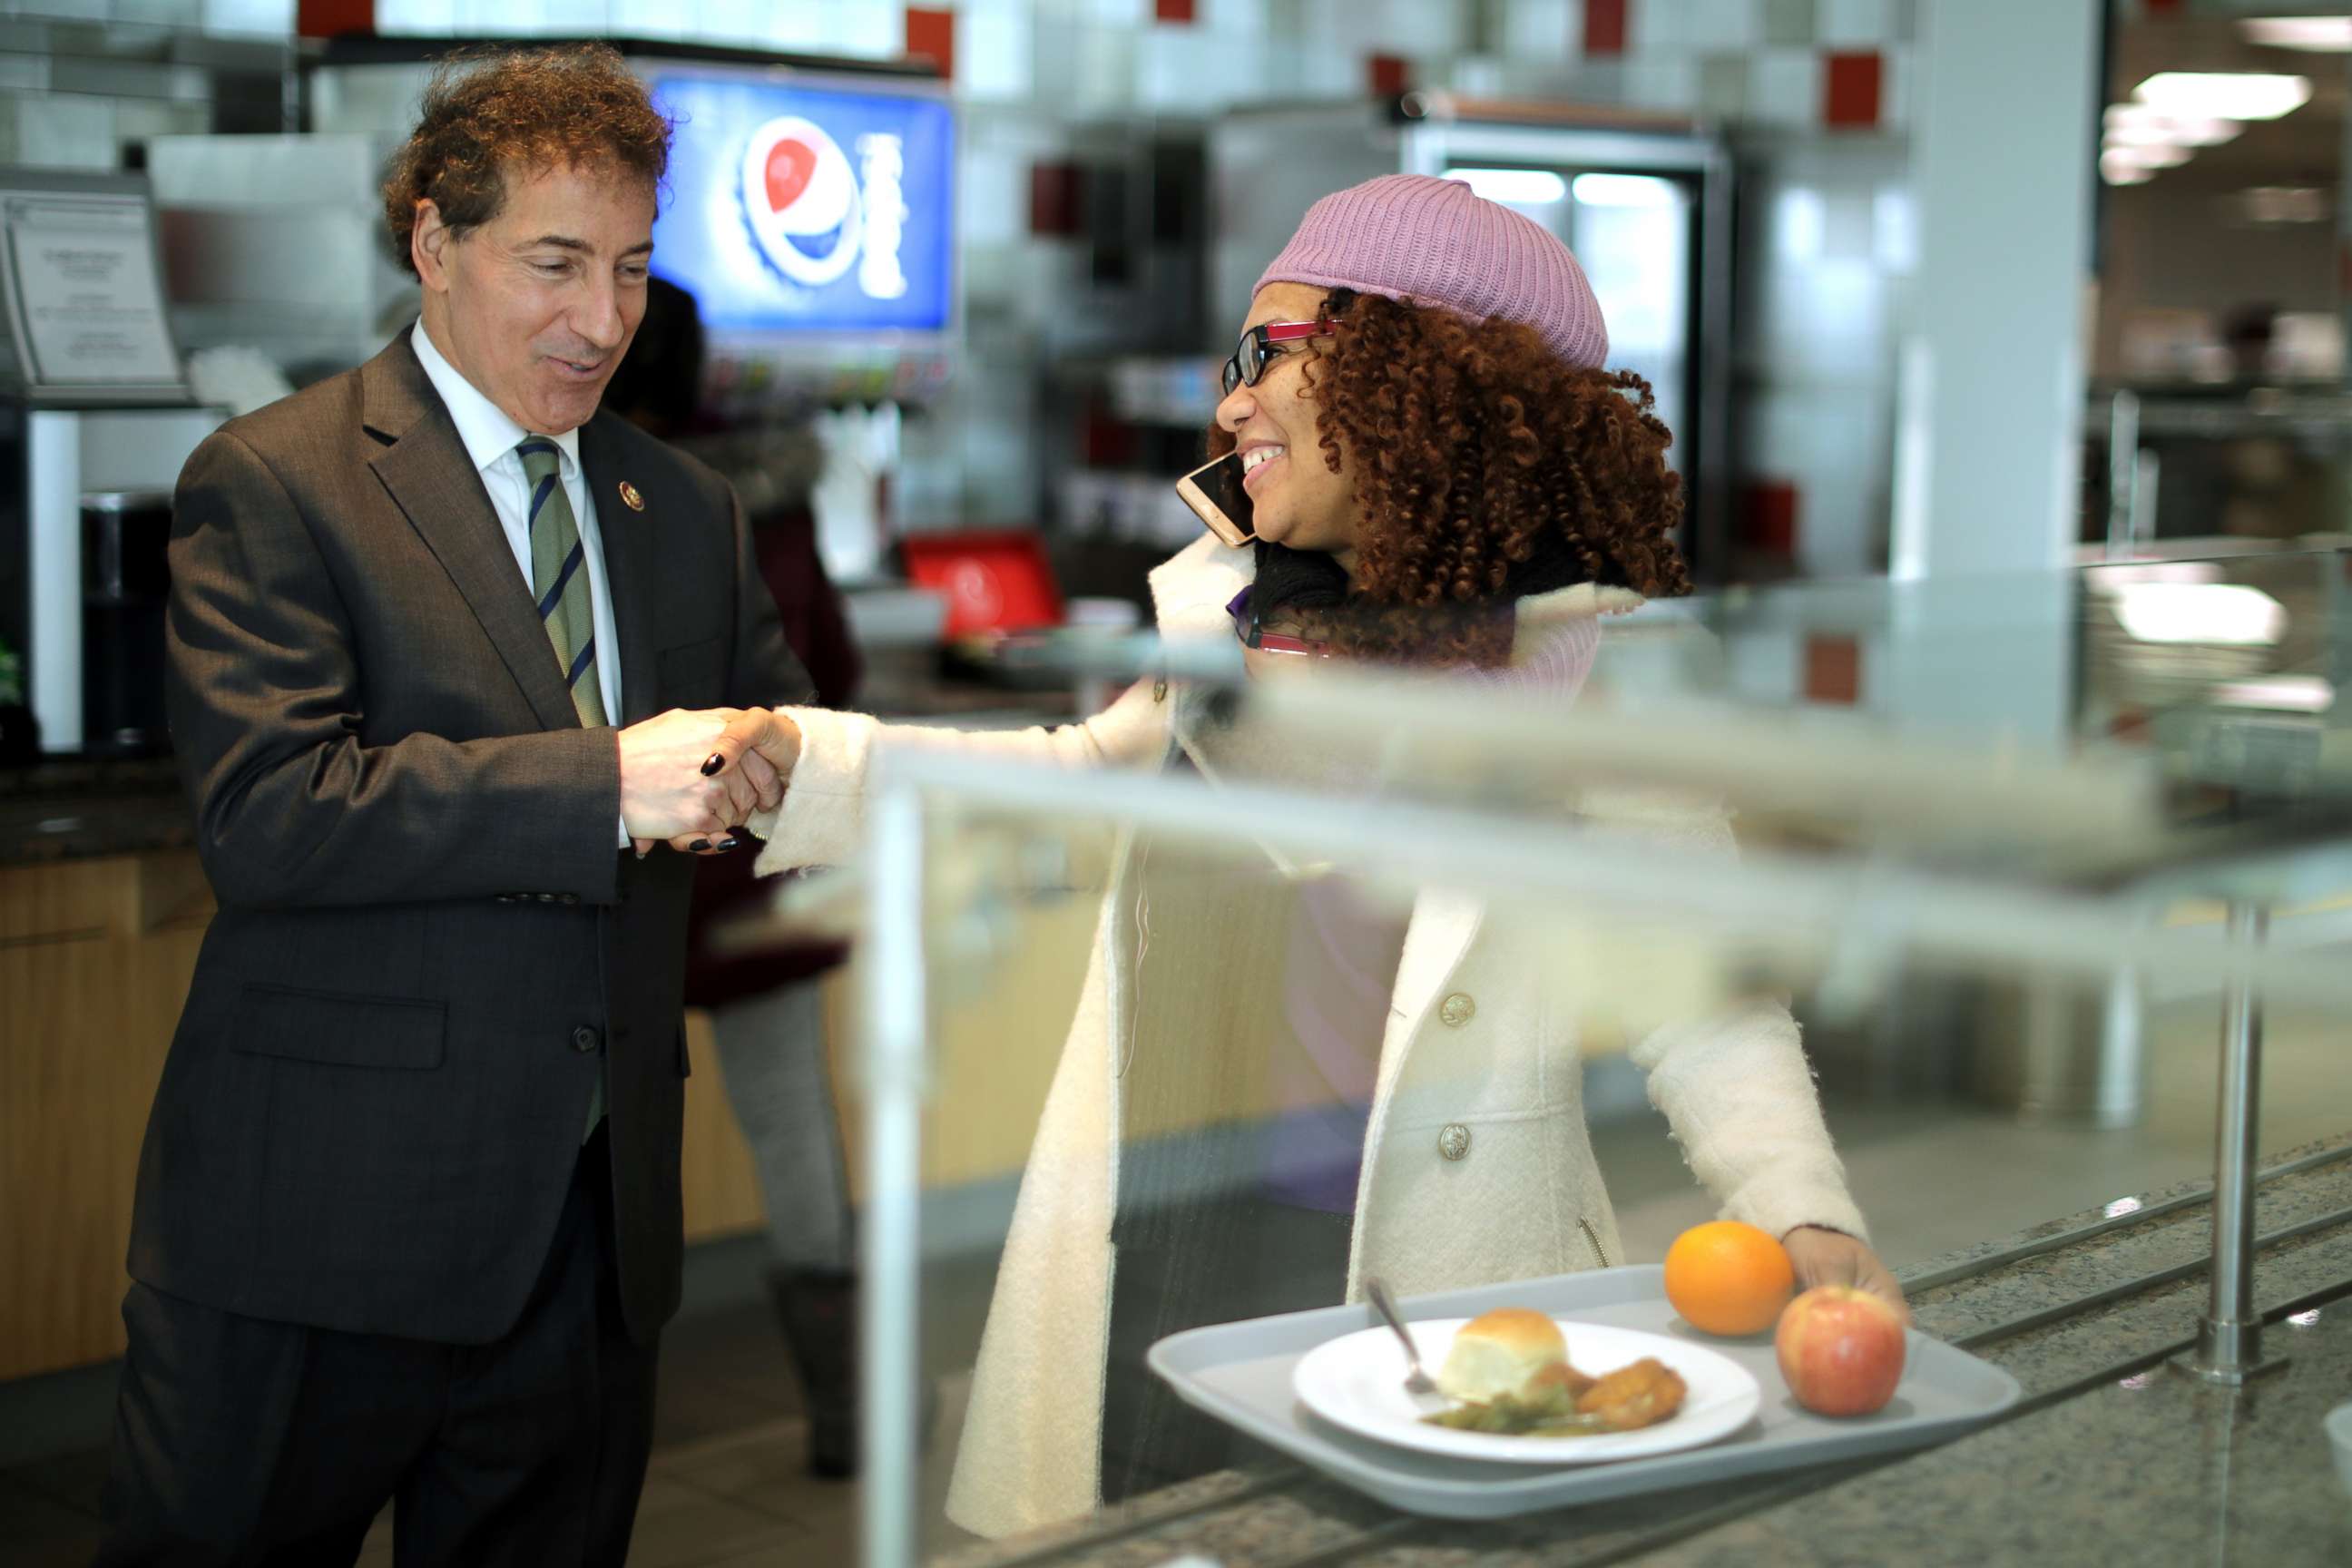 PHOTO: Rep. Jamie Raskin greets Consumer Product Safety Commission employee Stacy Summerville as she gathered her lunch in the cafeteria at the Tommy Douglas Conference Center, Jan. 14, 2019, in Silver Spring, Maryland.